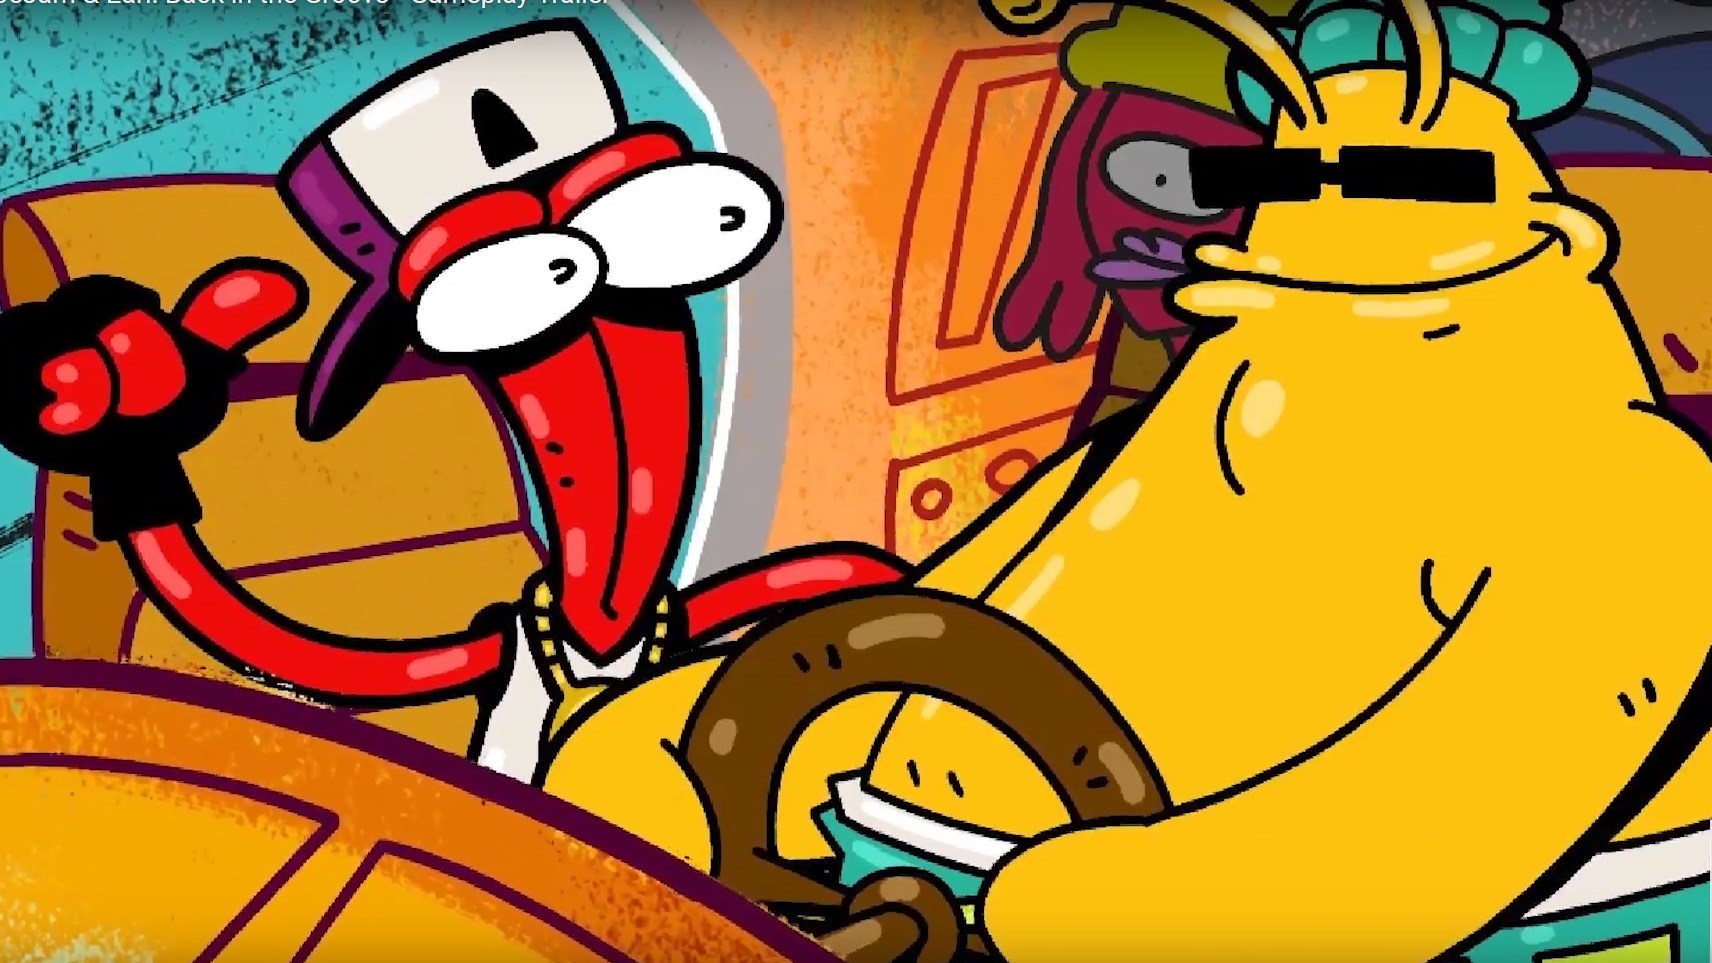  Amazon partners with basketball legend Steph Curry to make a ToeJam & Earl movie 